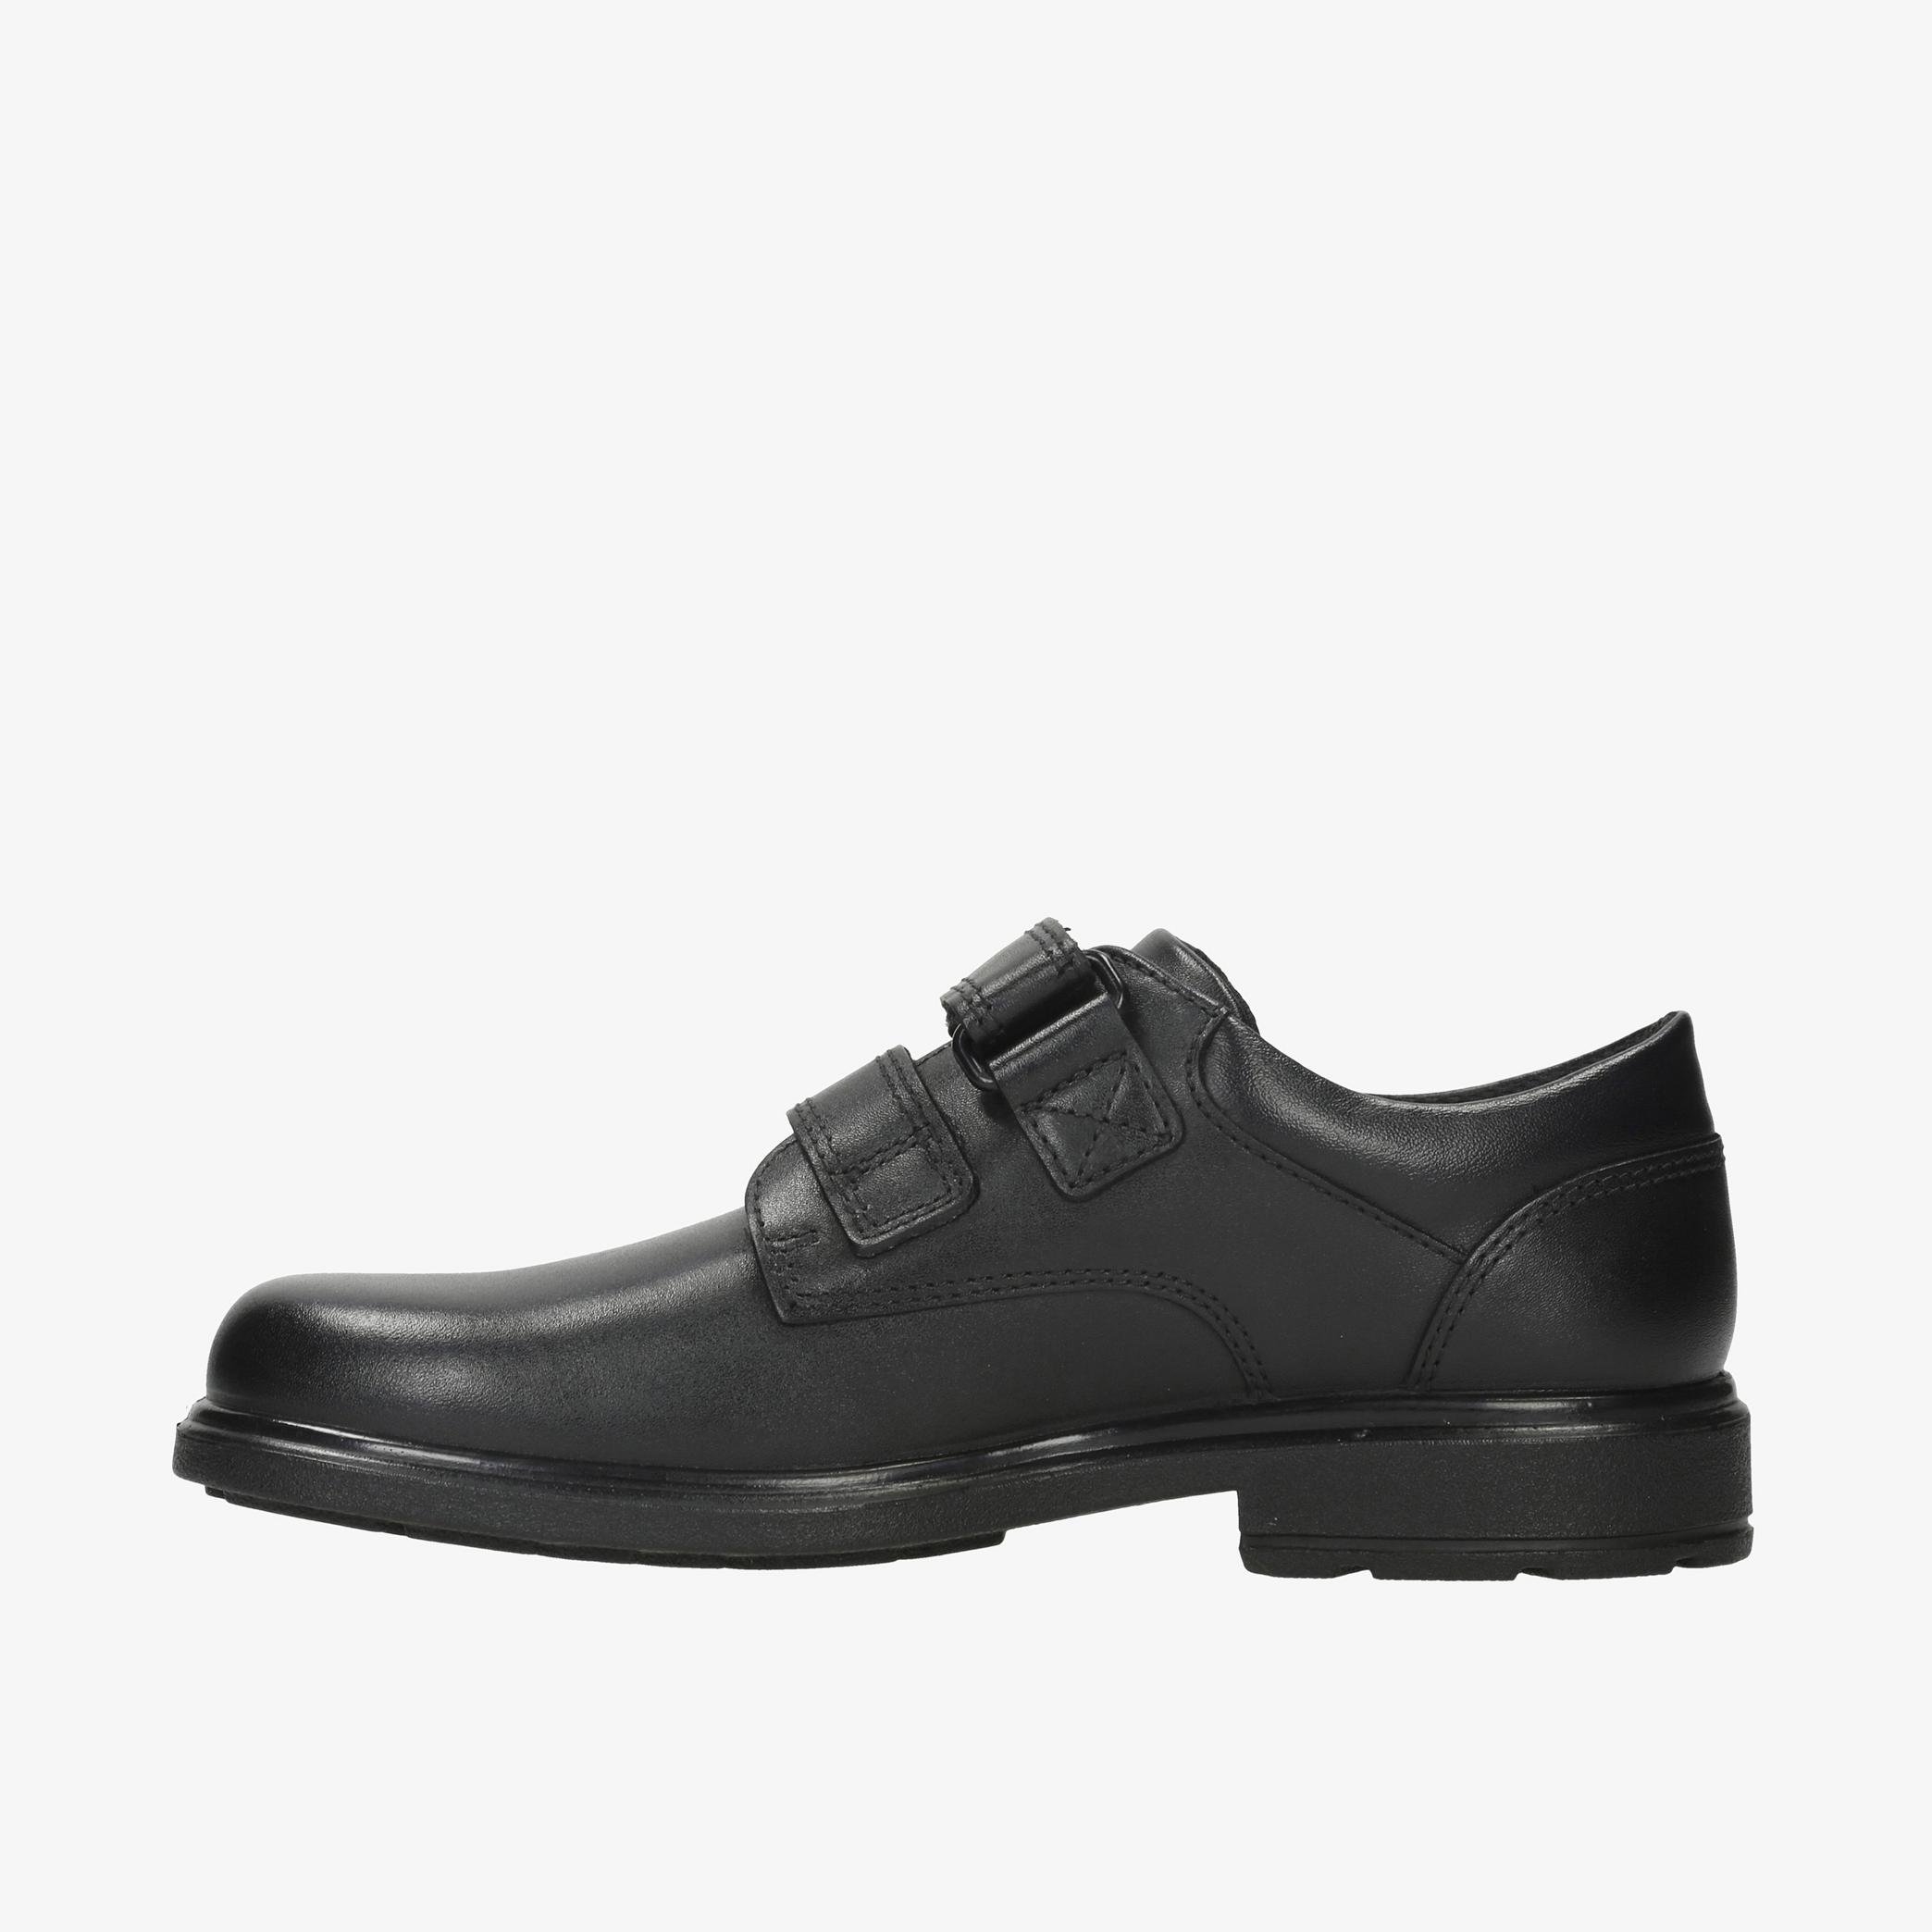 Remi Pace Youth Black Leather Shoes, view 2 of 6